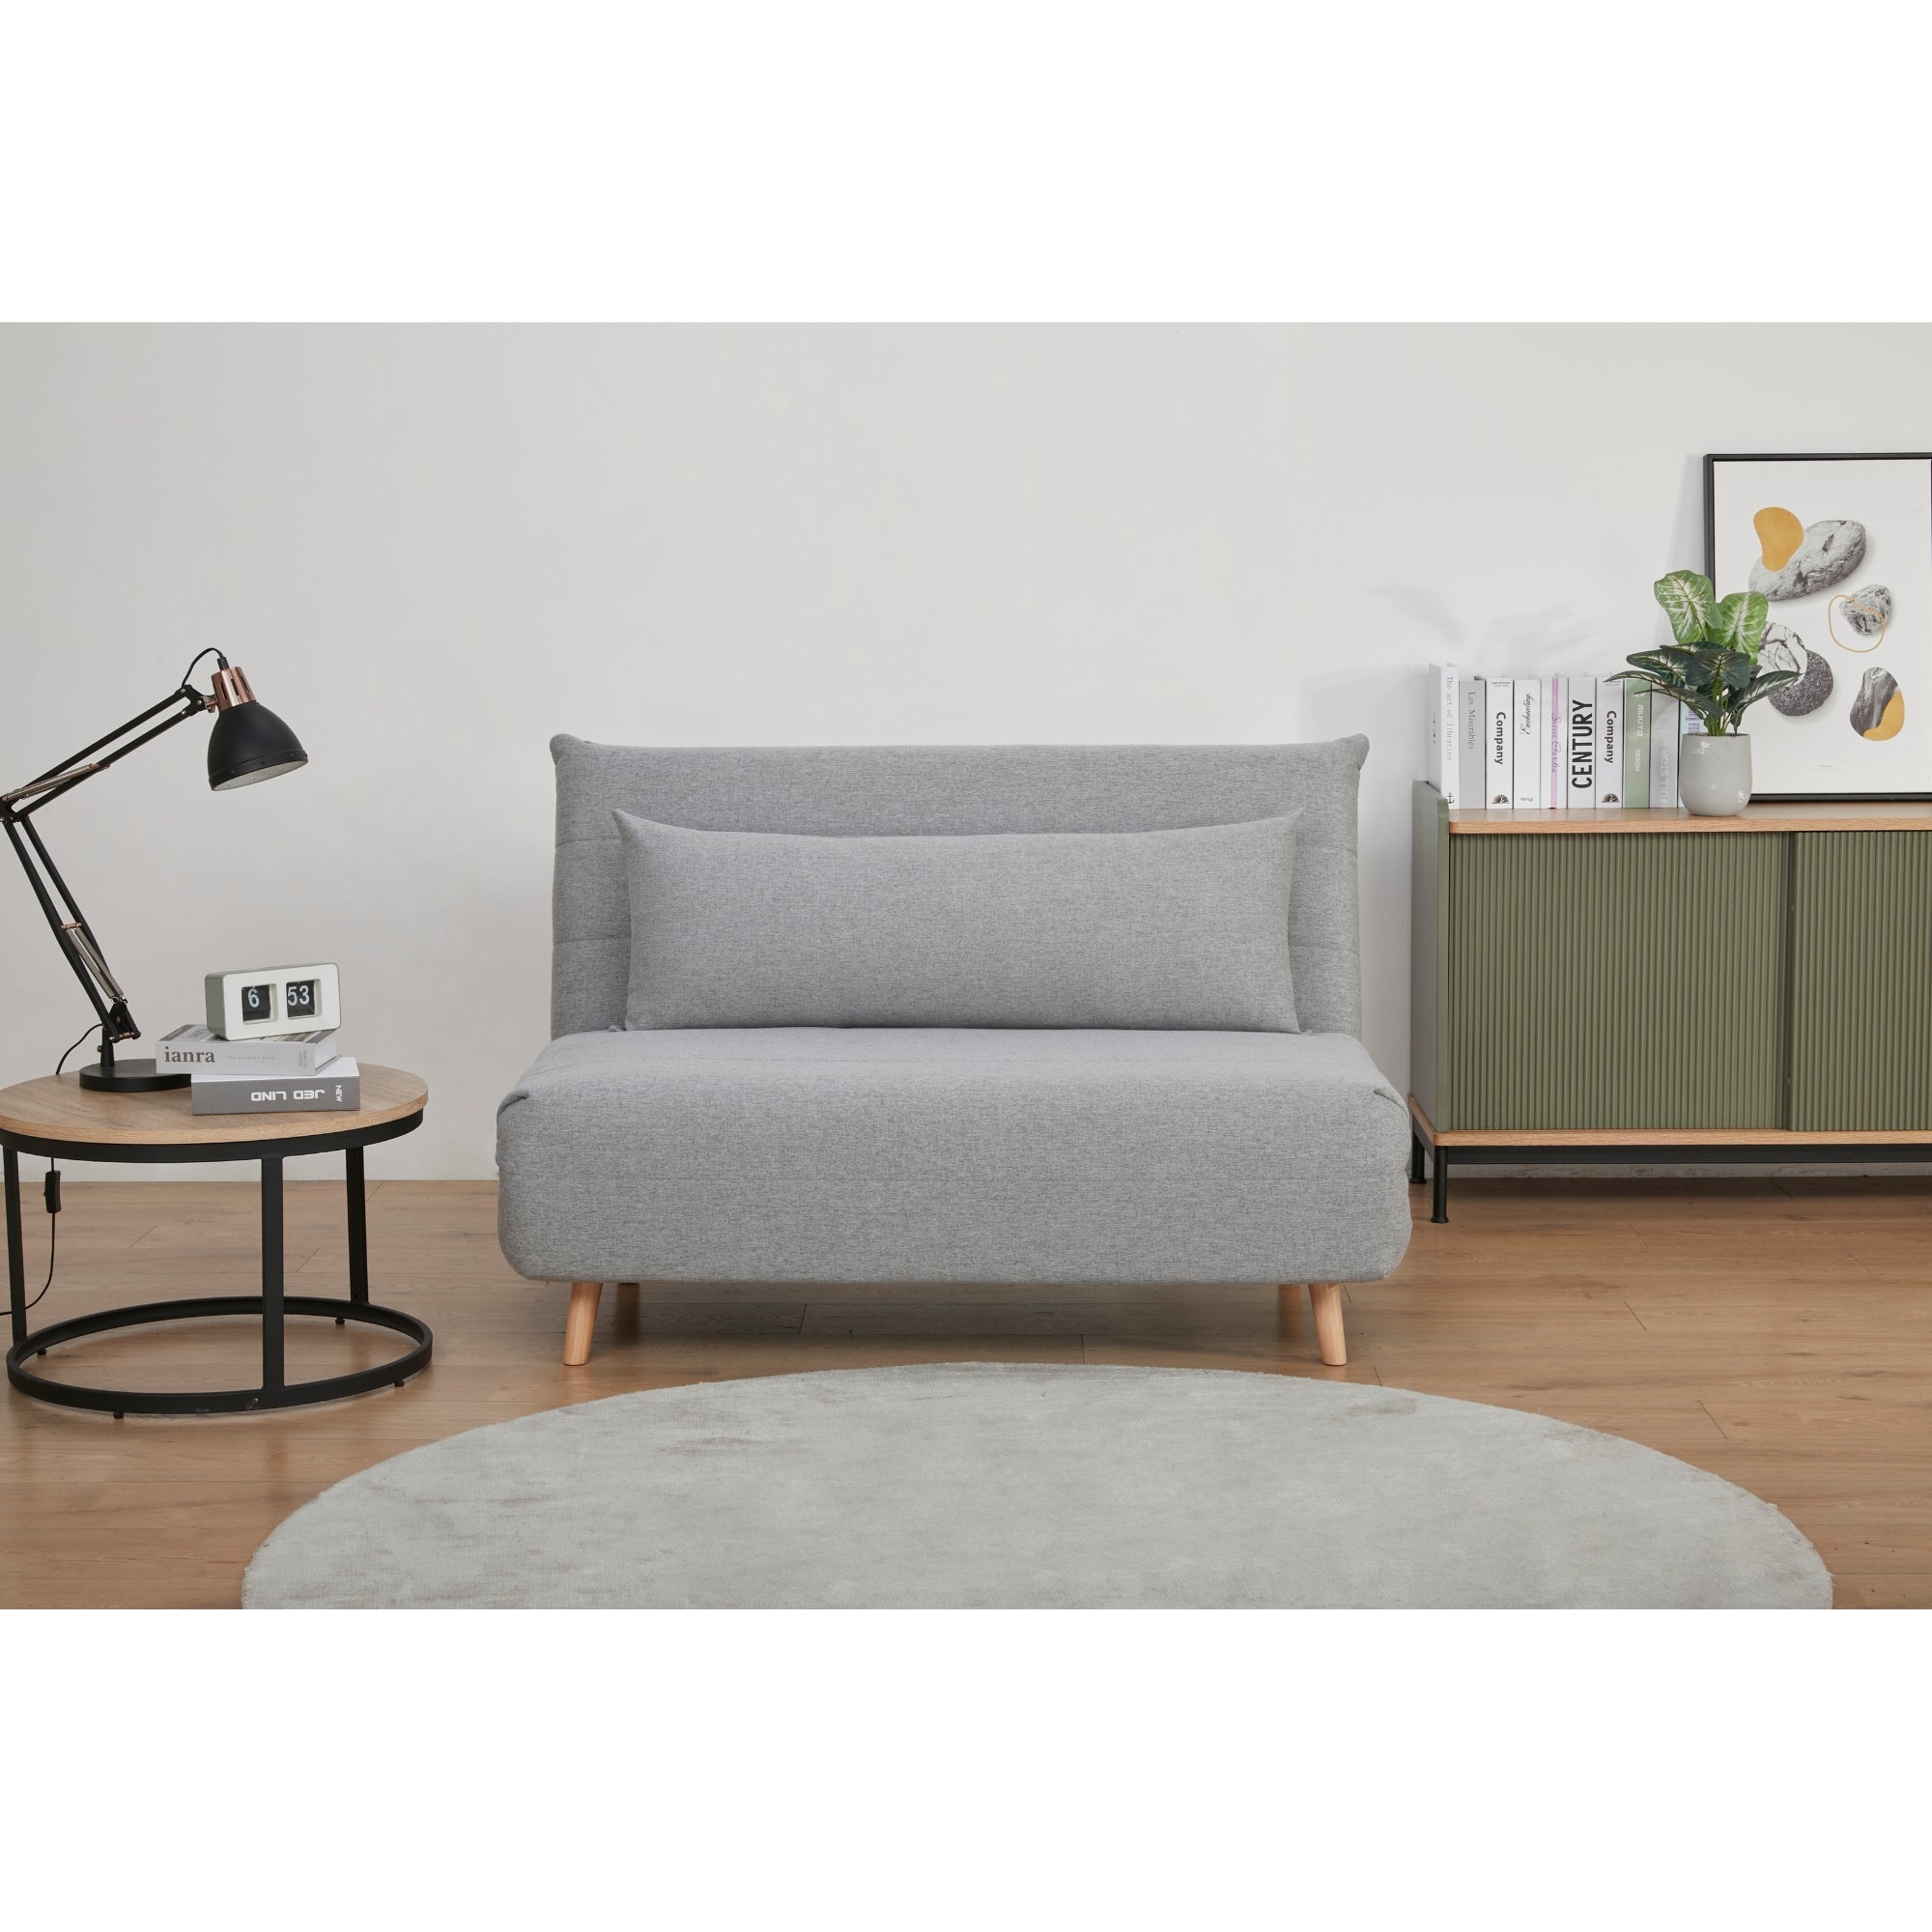 Elegant Grey 2-Seater Sofa Bed, Wooden Legs, Polyester Fabric